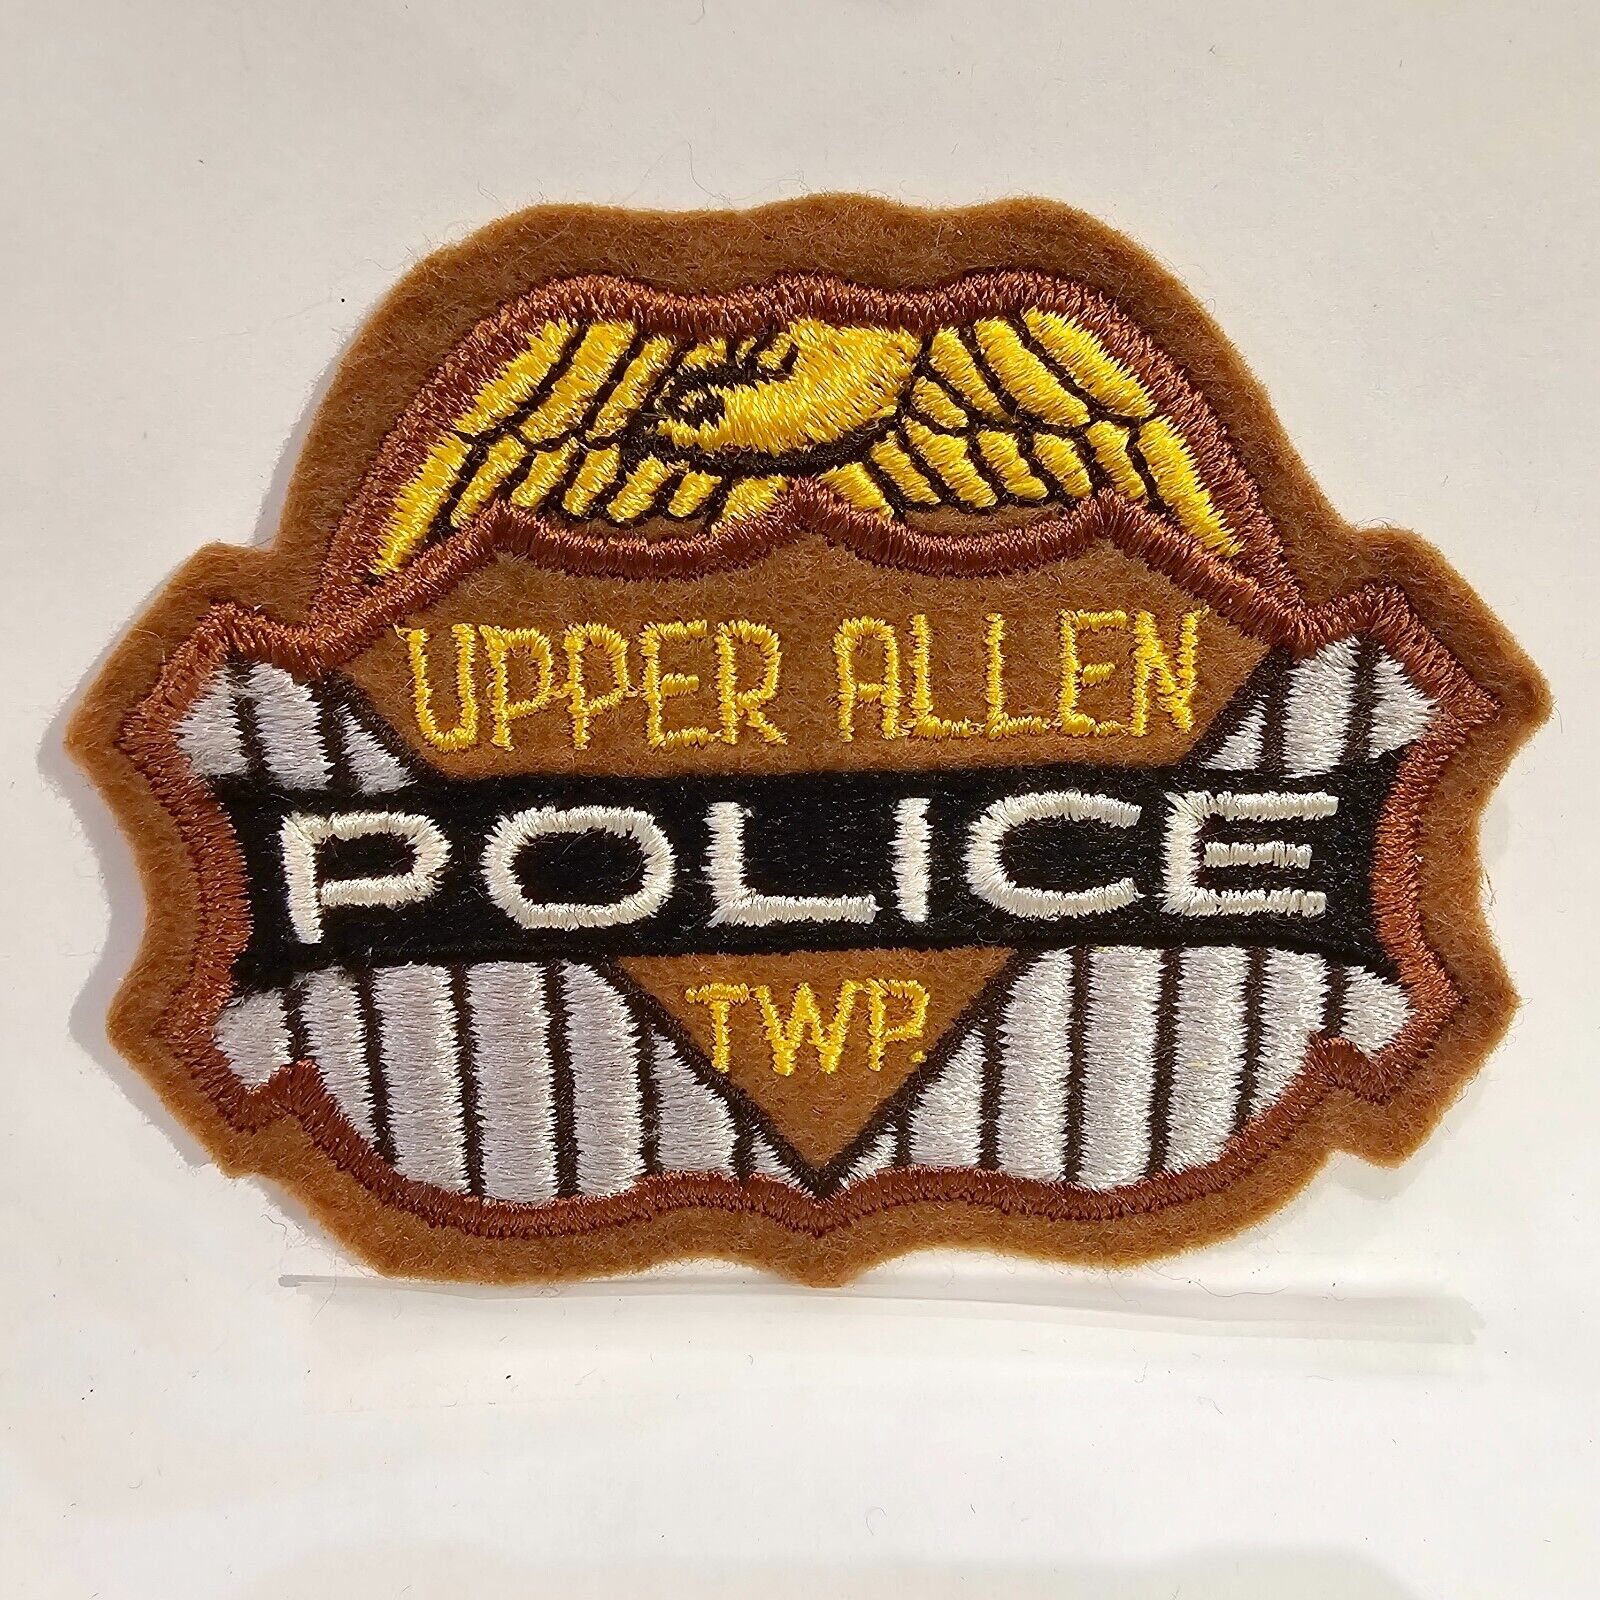 Obsolete Police Badge Patch Upper Allen TWP Township